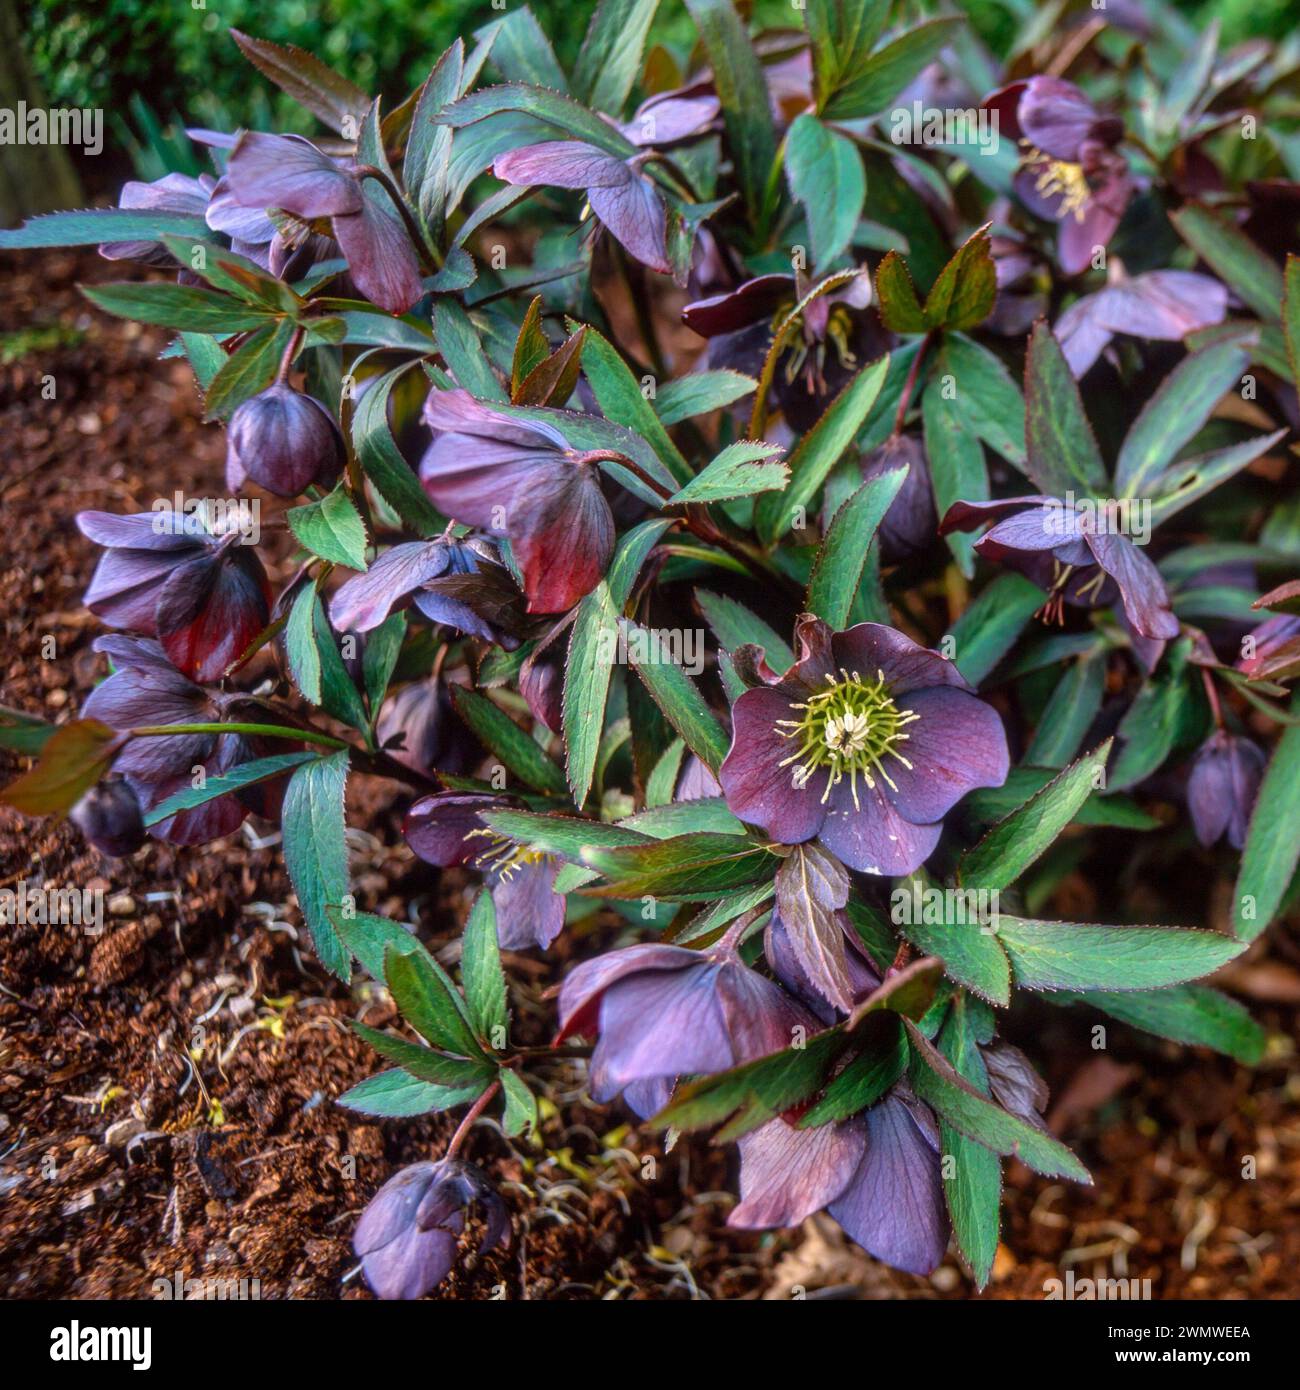 Hellebore 'Smokey blue' hellebore plant with dark slate-purple flowers in late Winter early Spring growing in English garden, England, UK Stock Photo